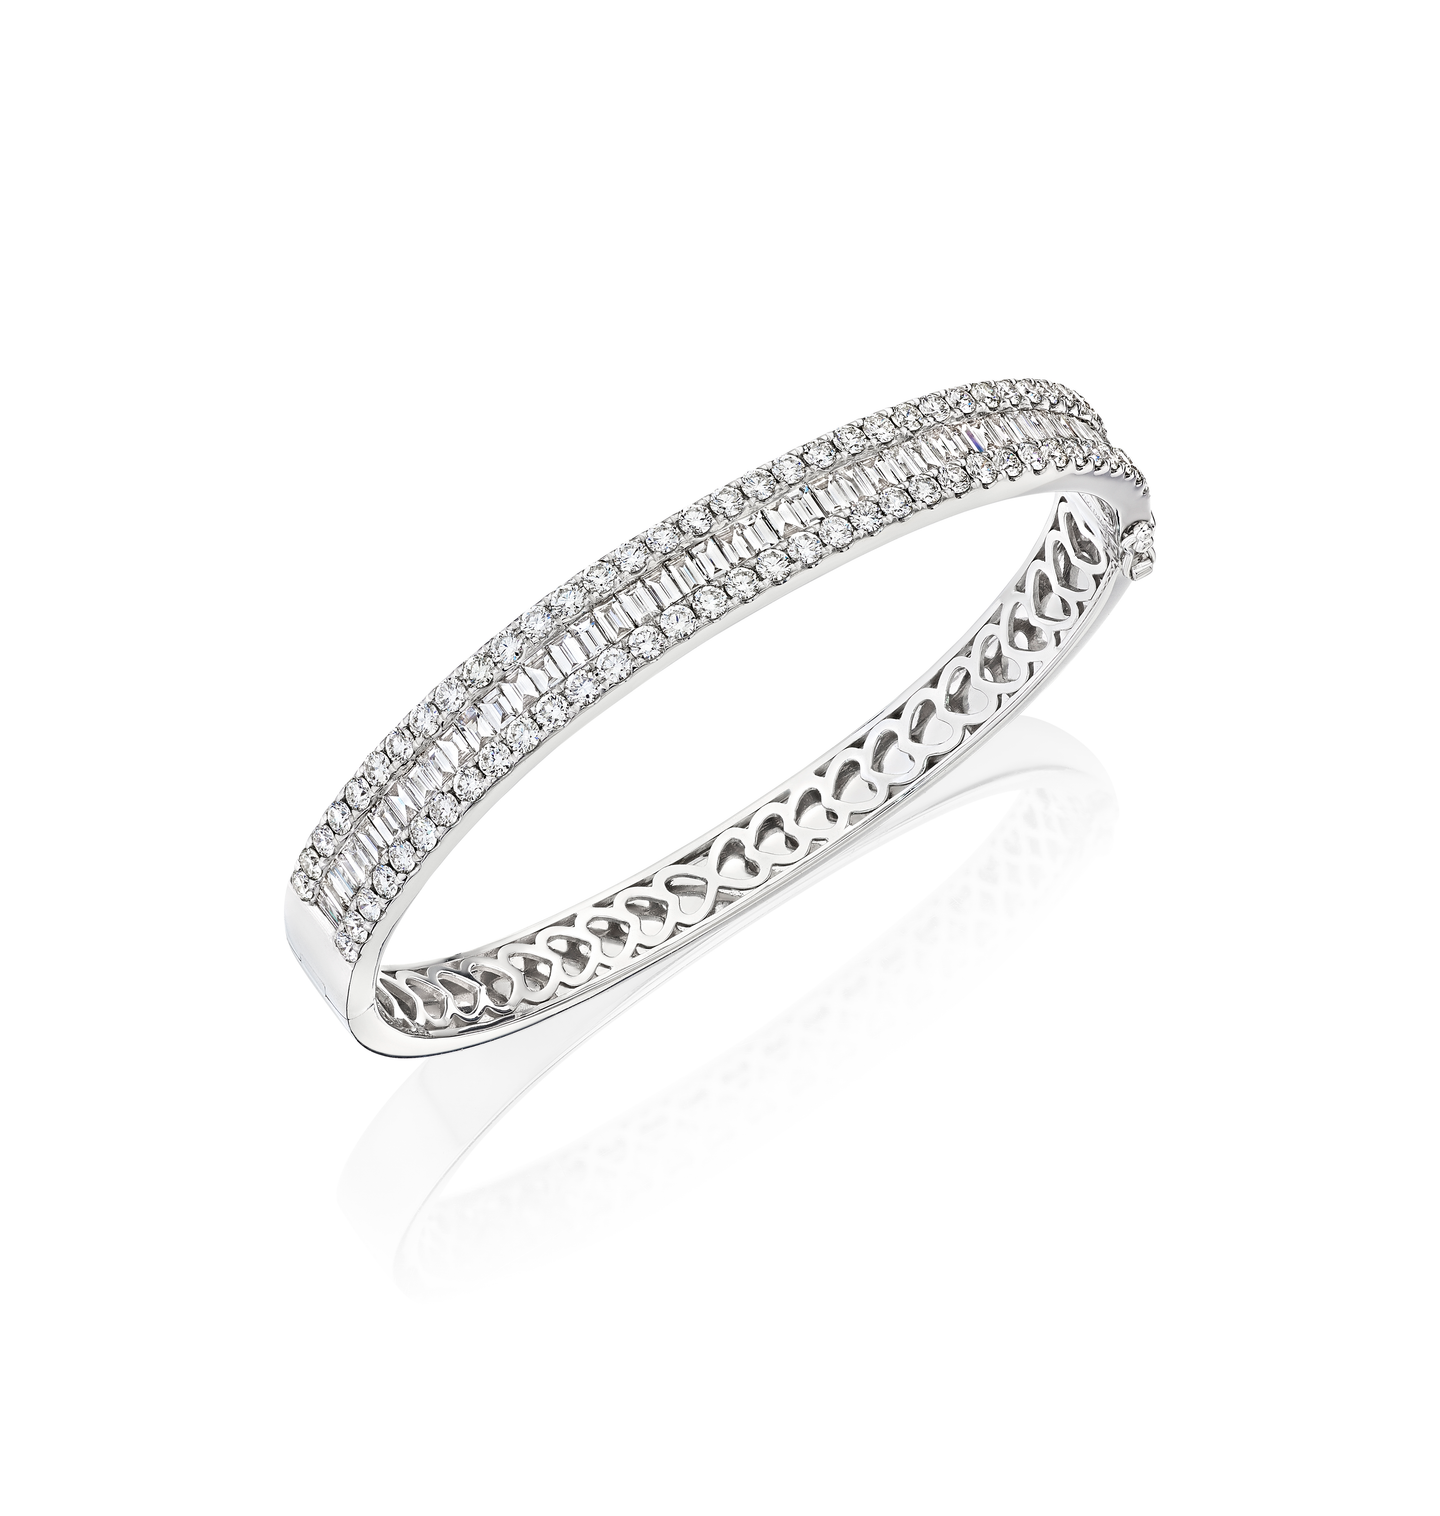 Sabel Collection White Gold Baguette and Round Diamond Bangle